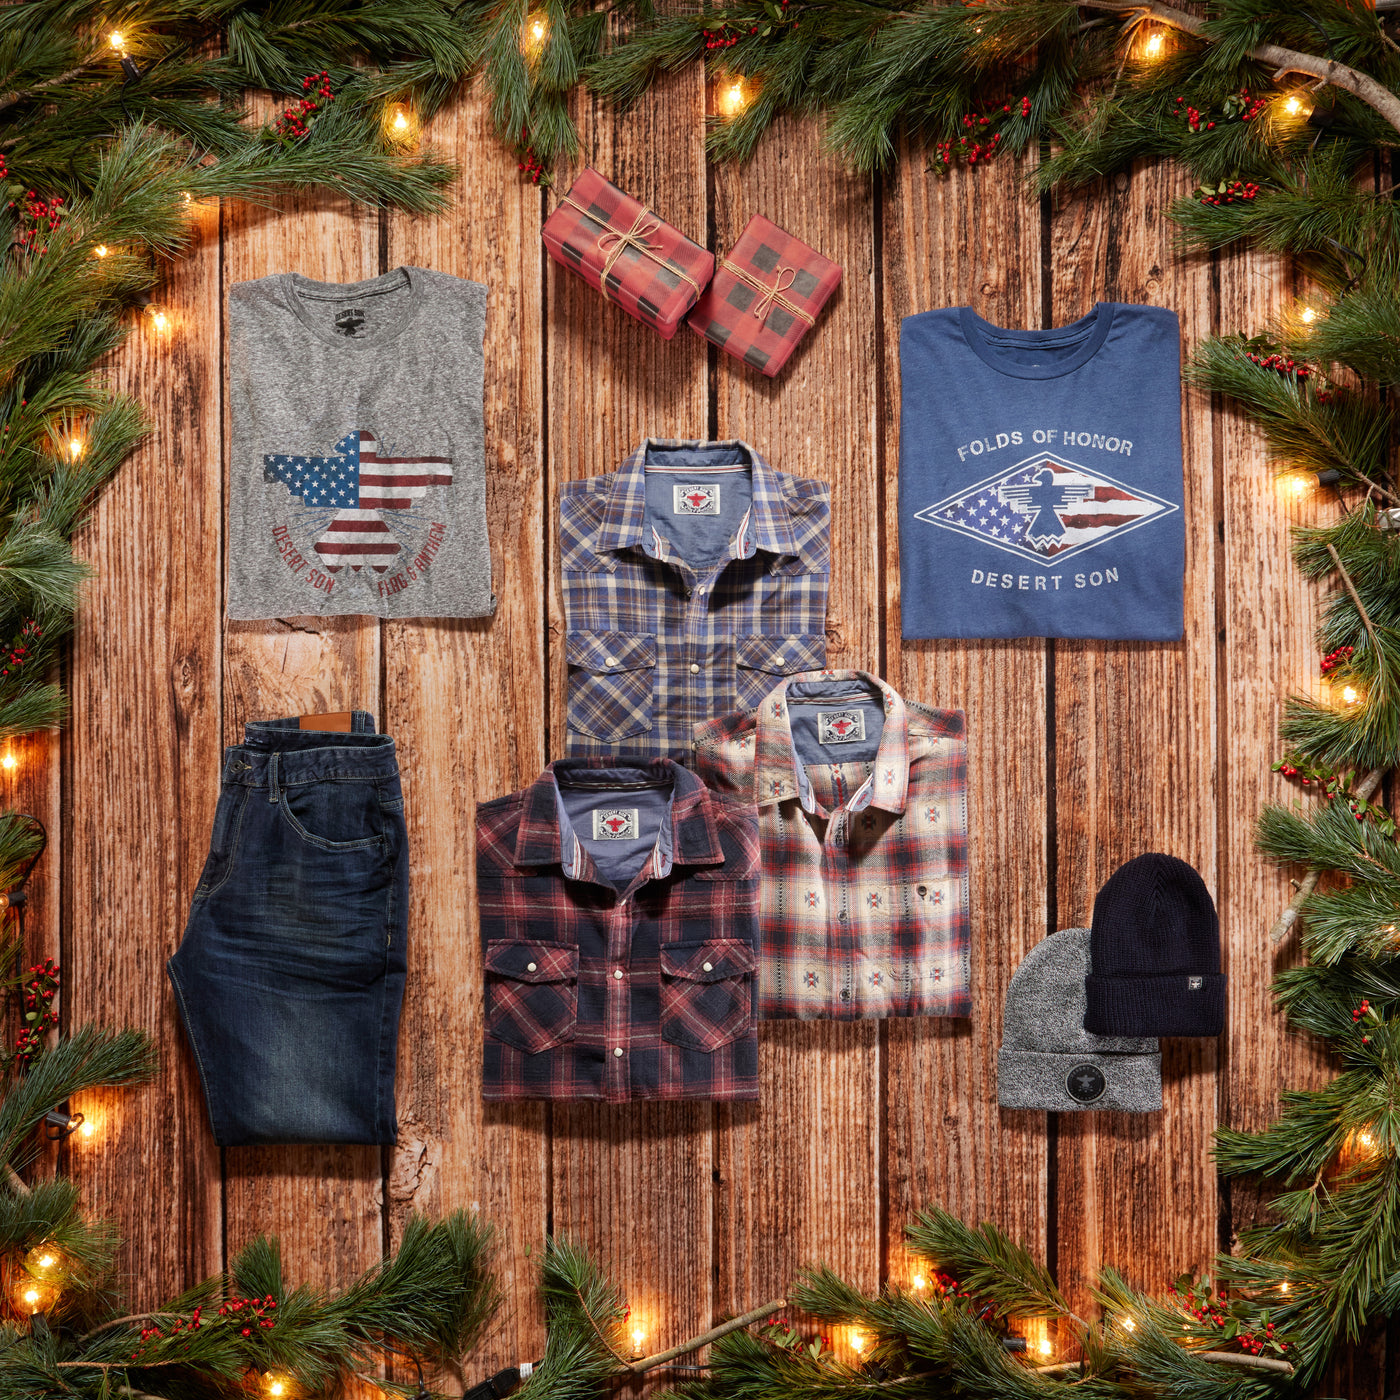 DIERKS BENTLEY HOLIDAY GIFT GUIDE